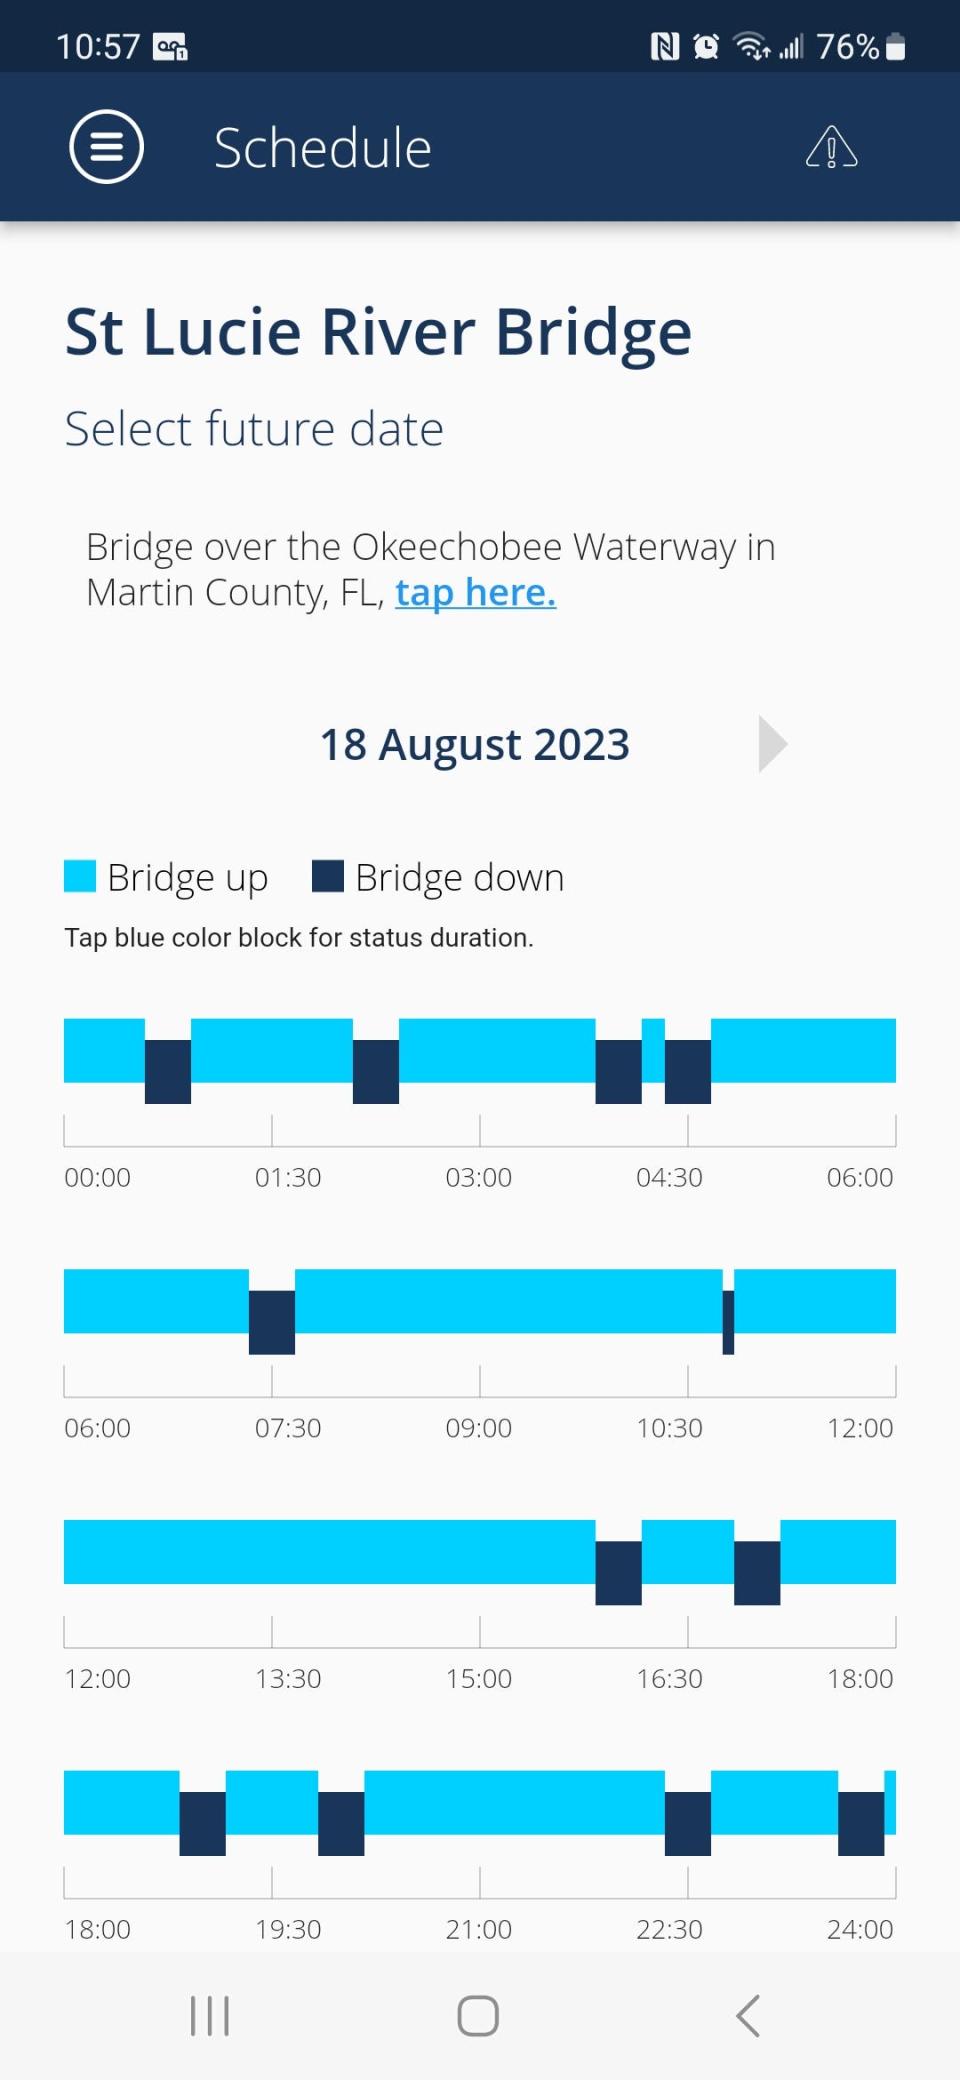 This is a screenshot of the Stuart railroad bridge schedule from an app developed and made live by Brightline and FEC Railway announced Aug. 18, 2023.